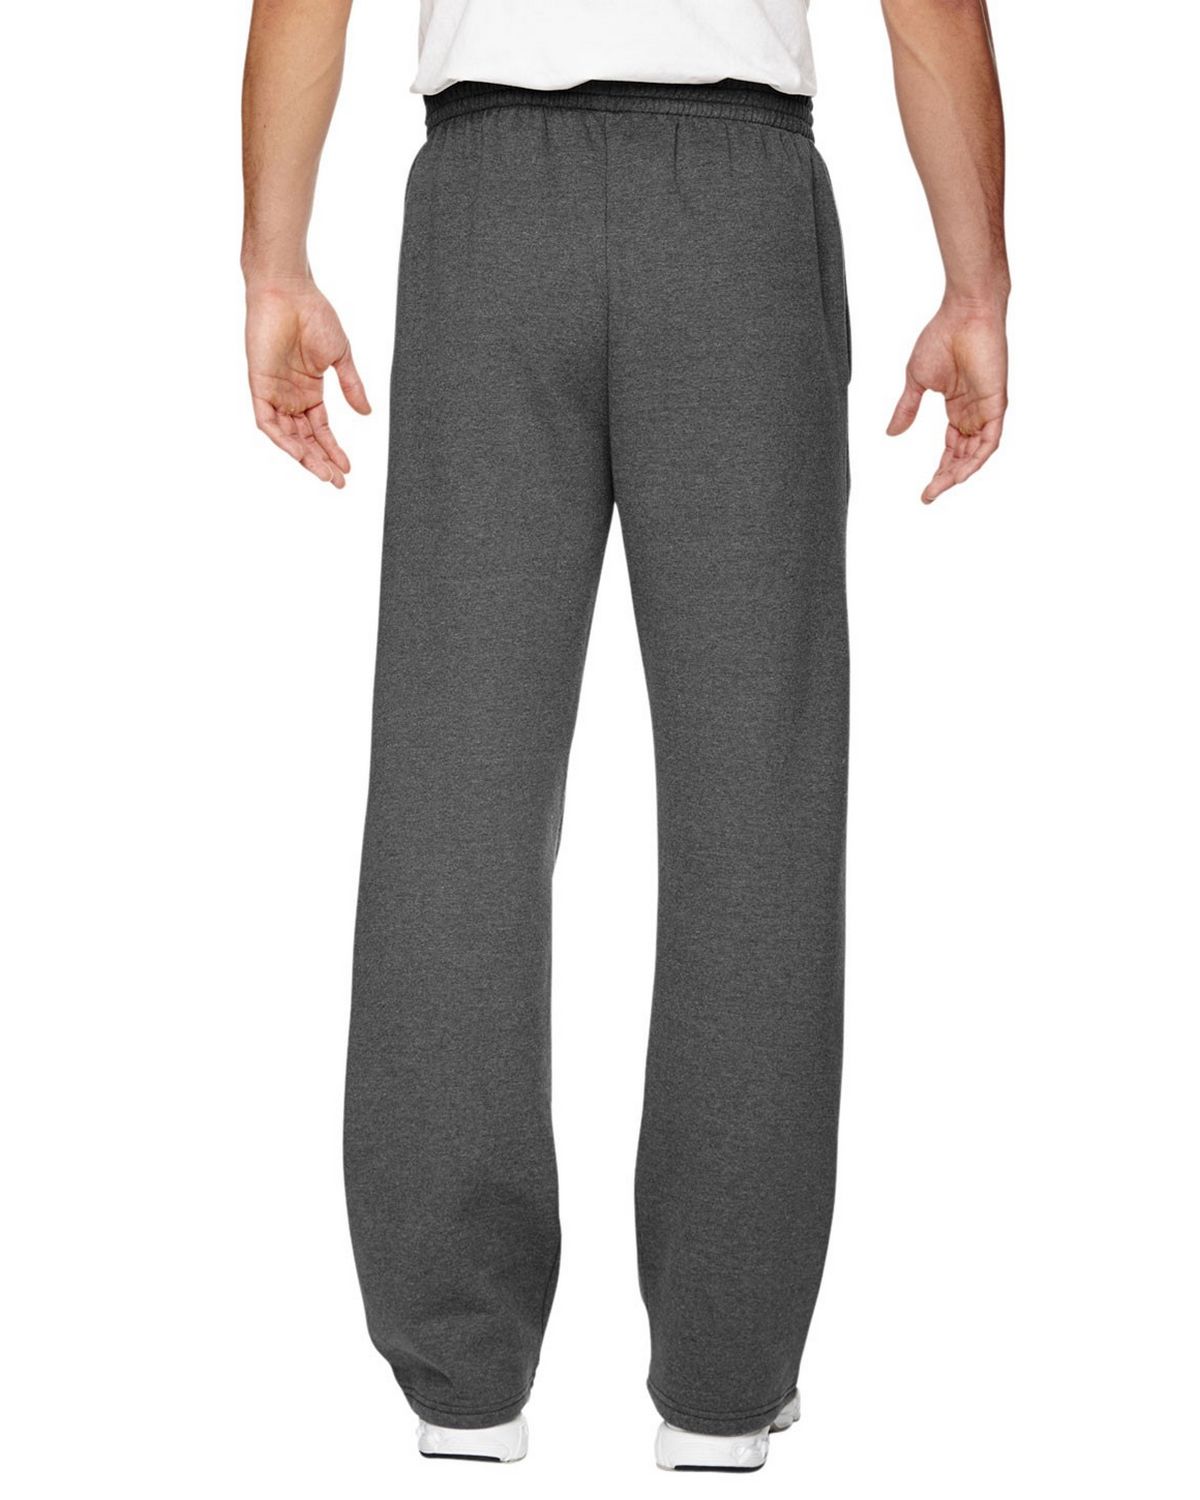 Fruit of the Loom Mens Big and Tall Pocketed Open Bottom Sweatpants